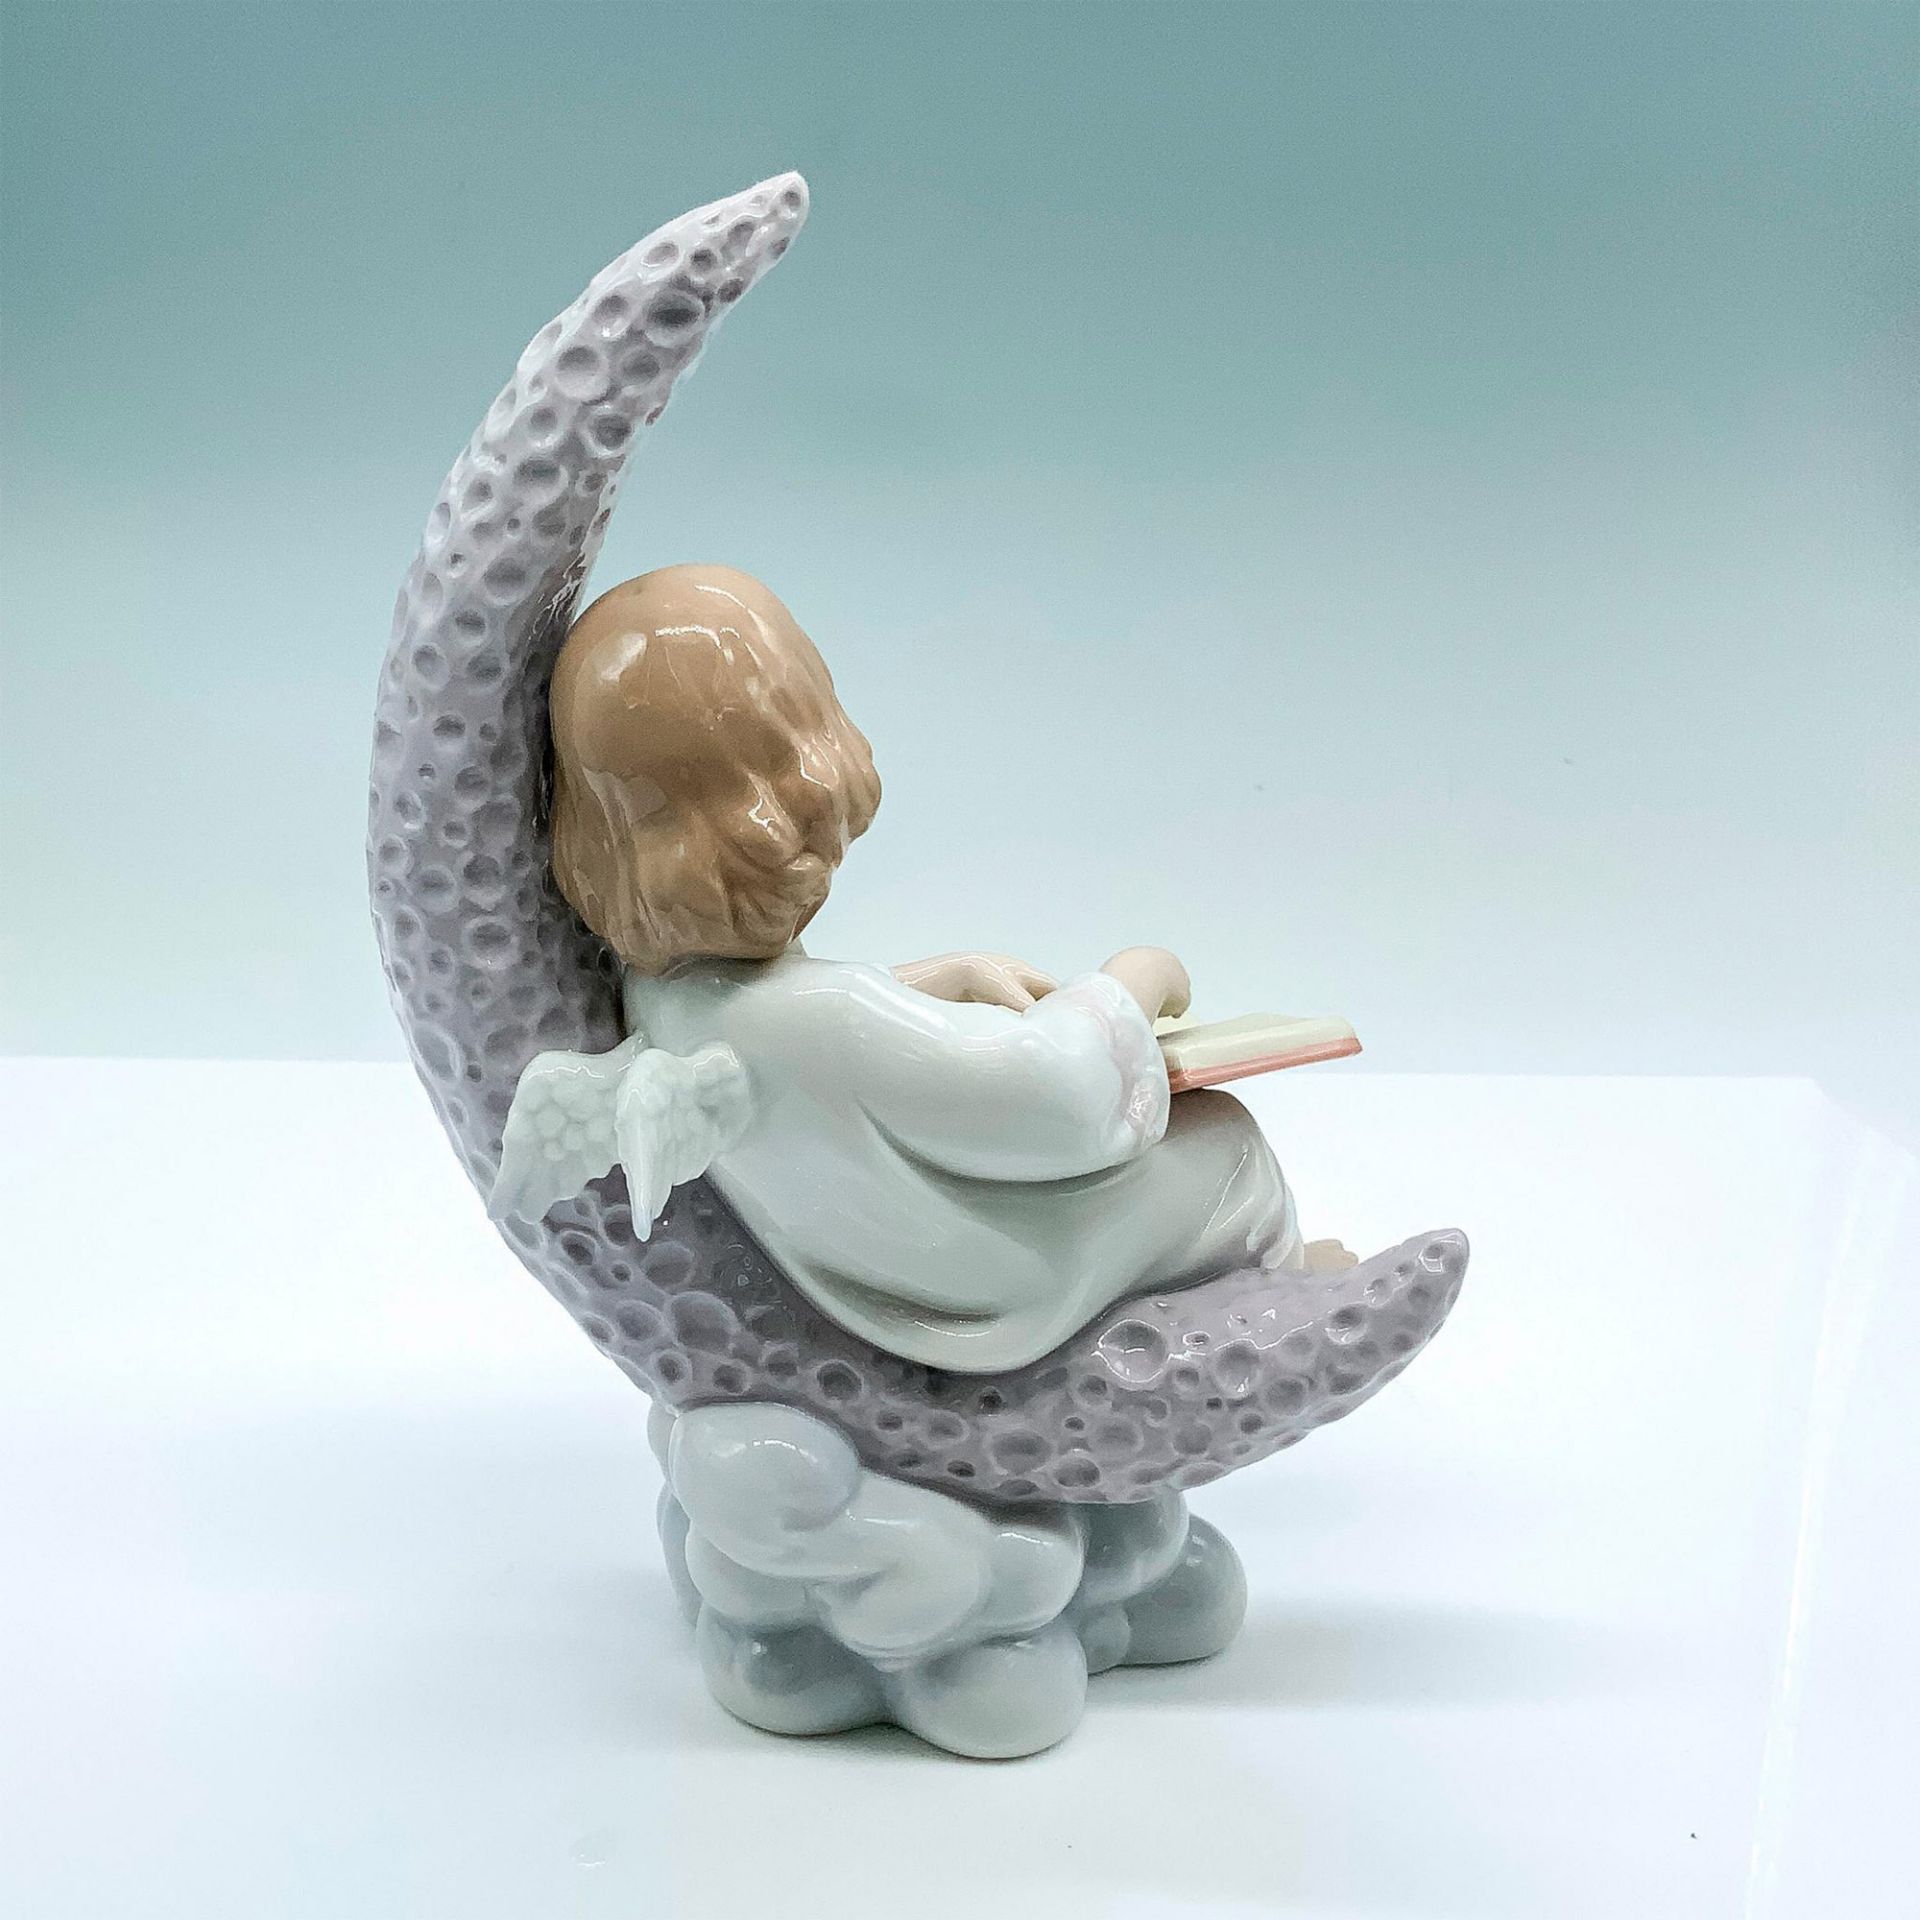 Dreaming Of The Stars 1006840 - Lladro Porcelain Figurine - Image 2 of 4